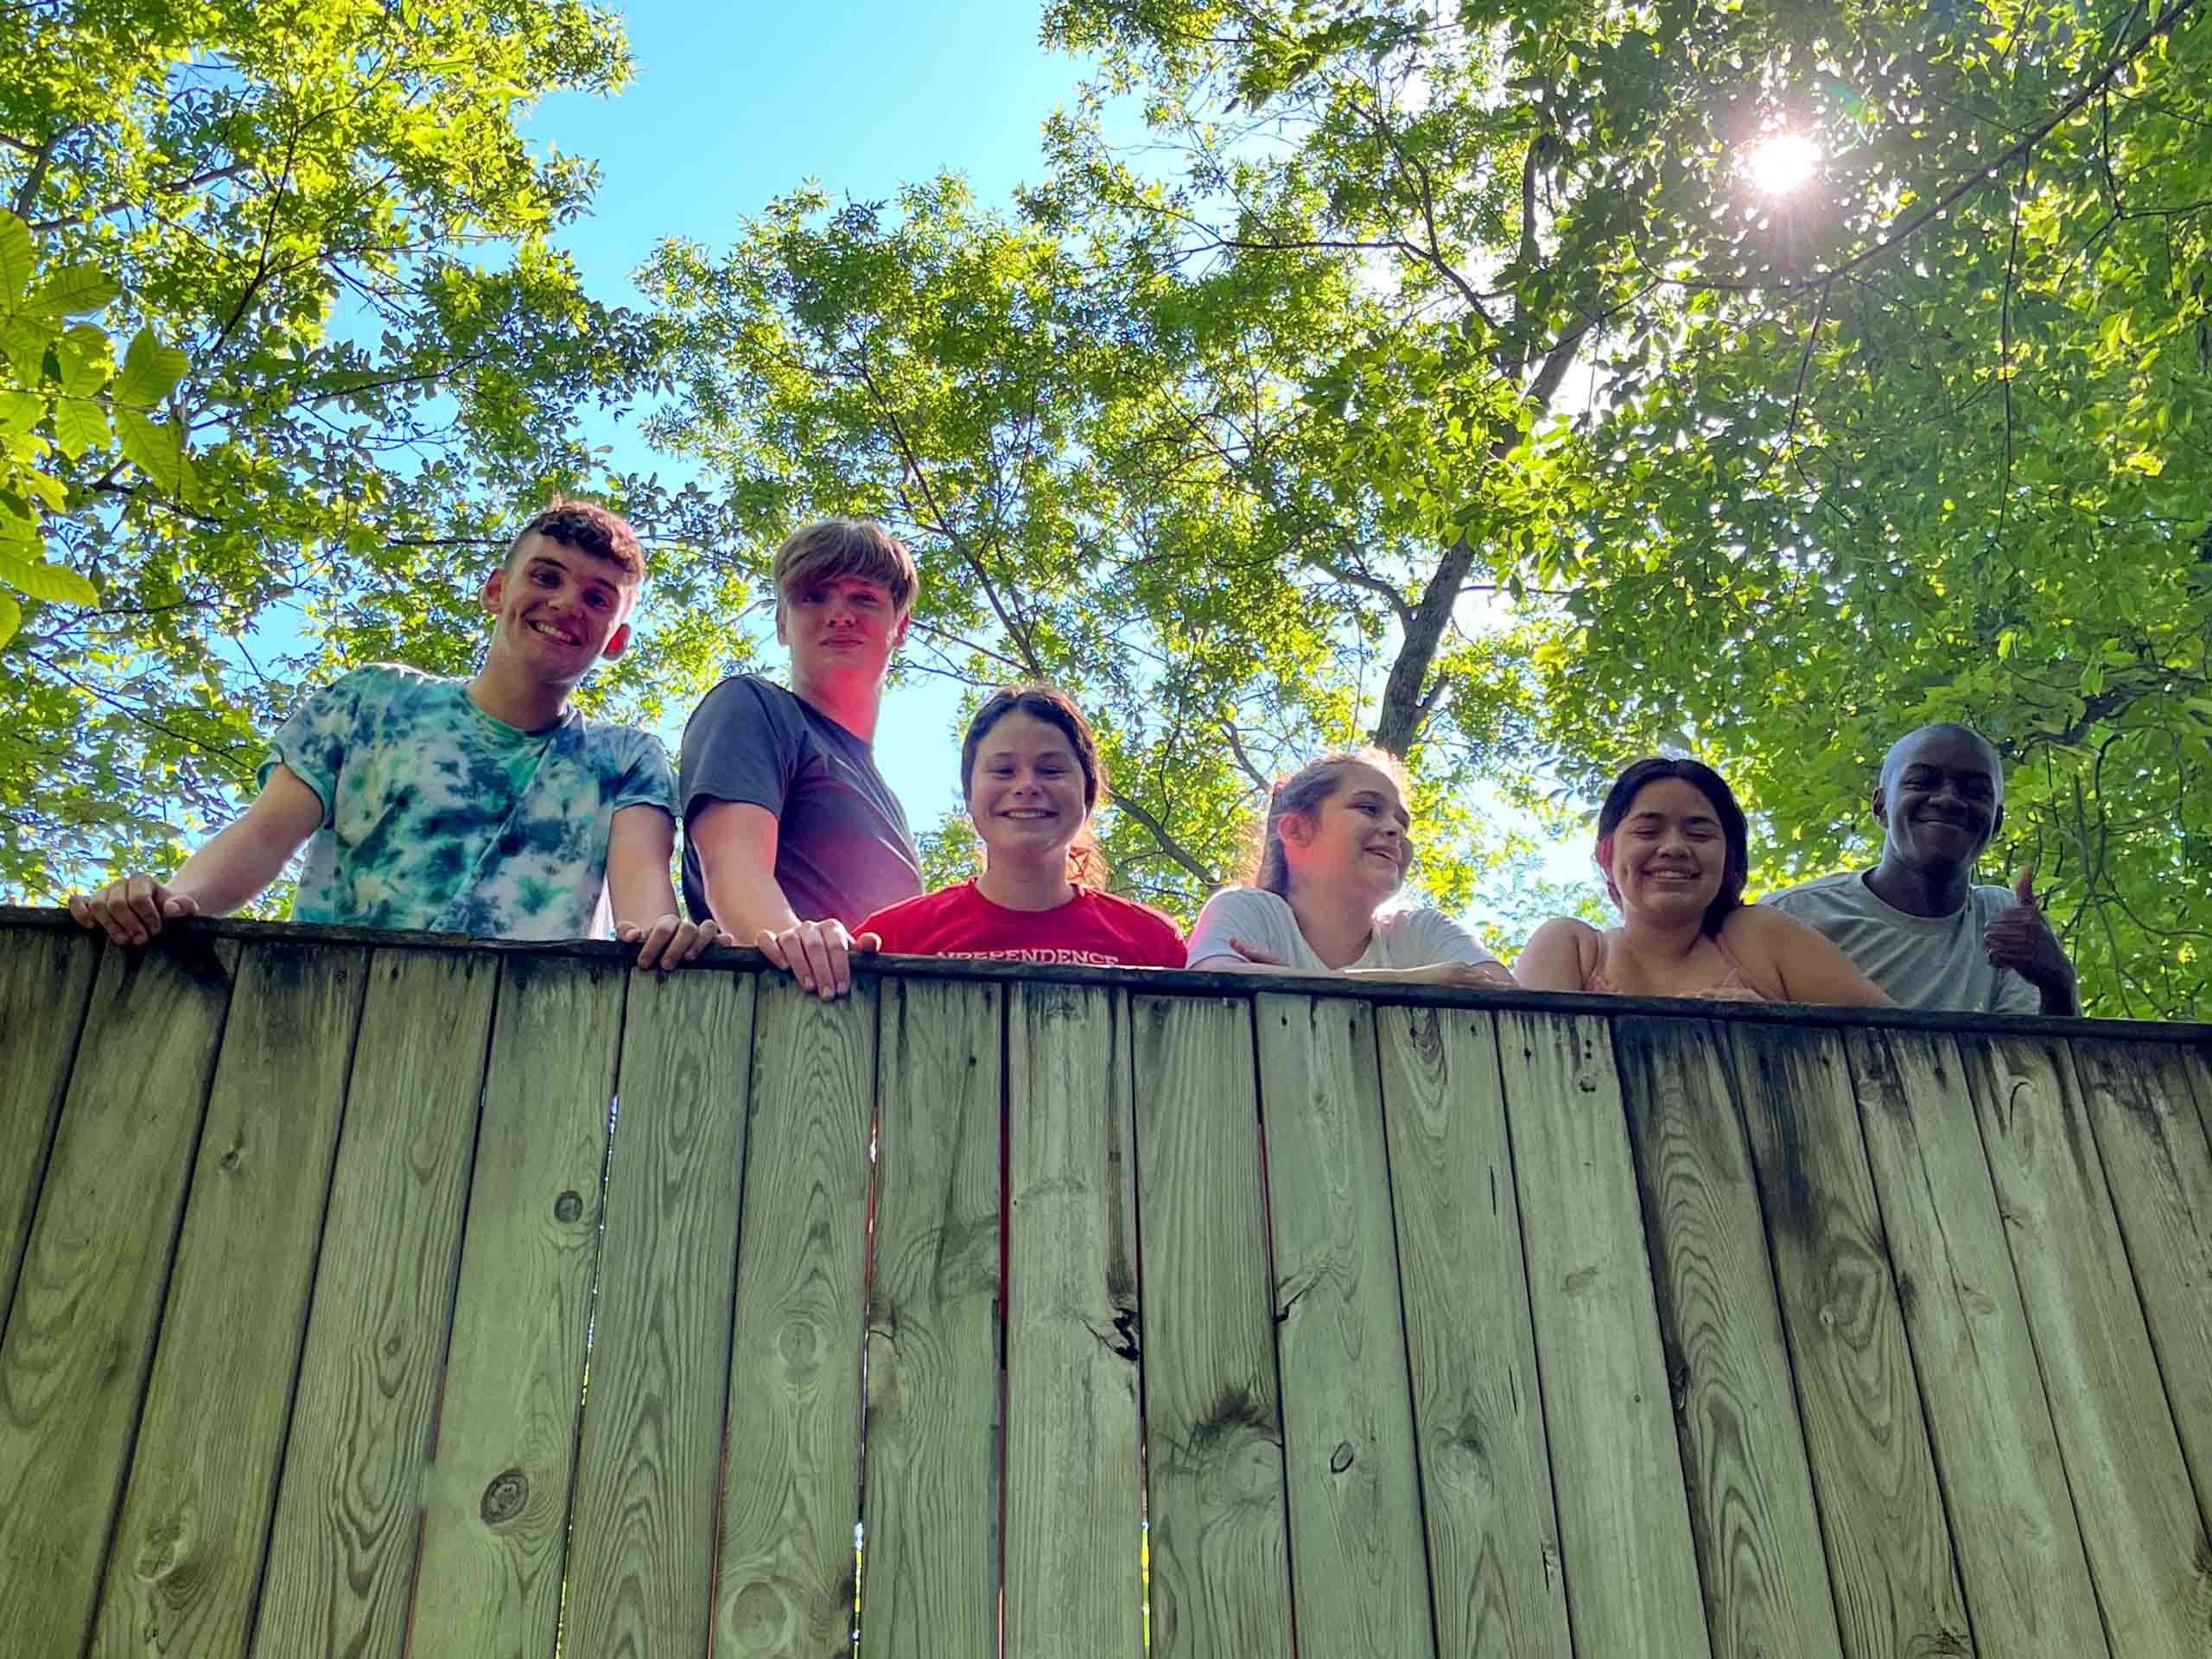 A group of kids standing on a wooden fence at an Iowa summer camp.